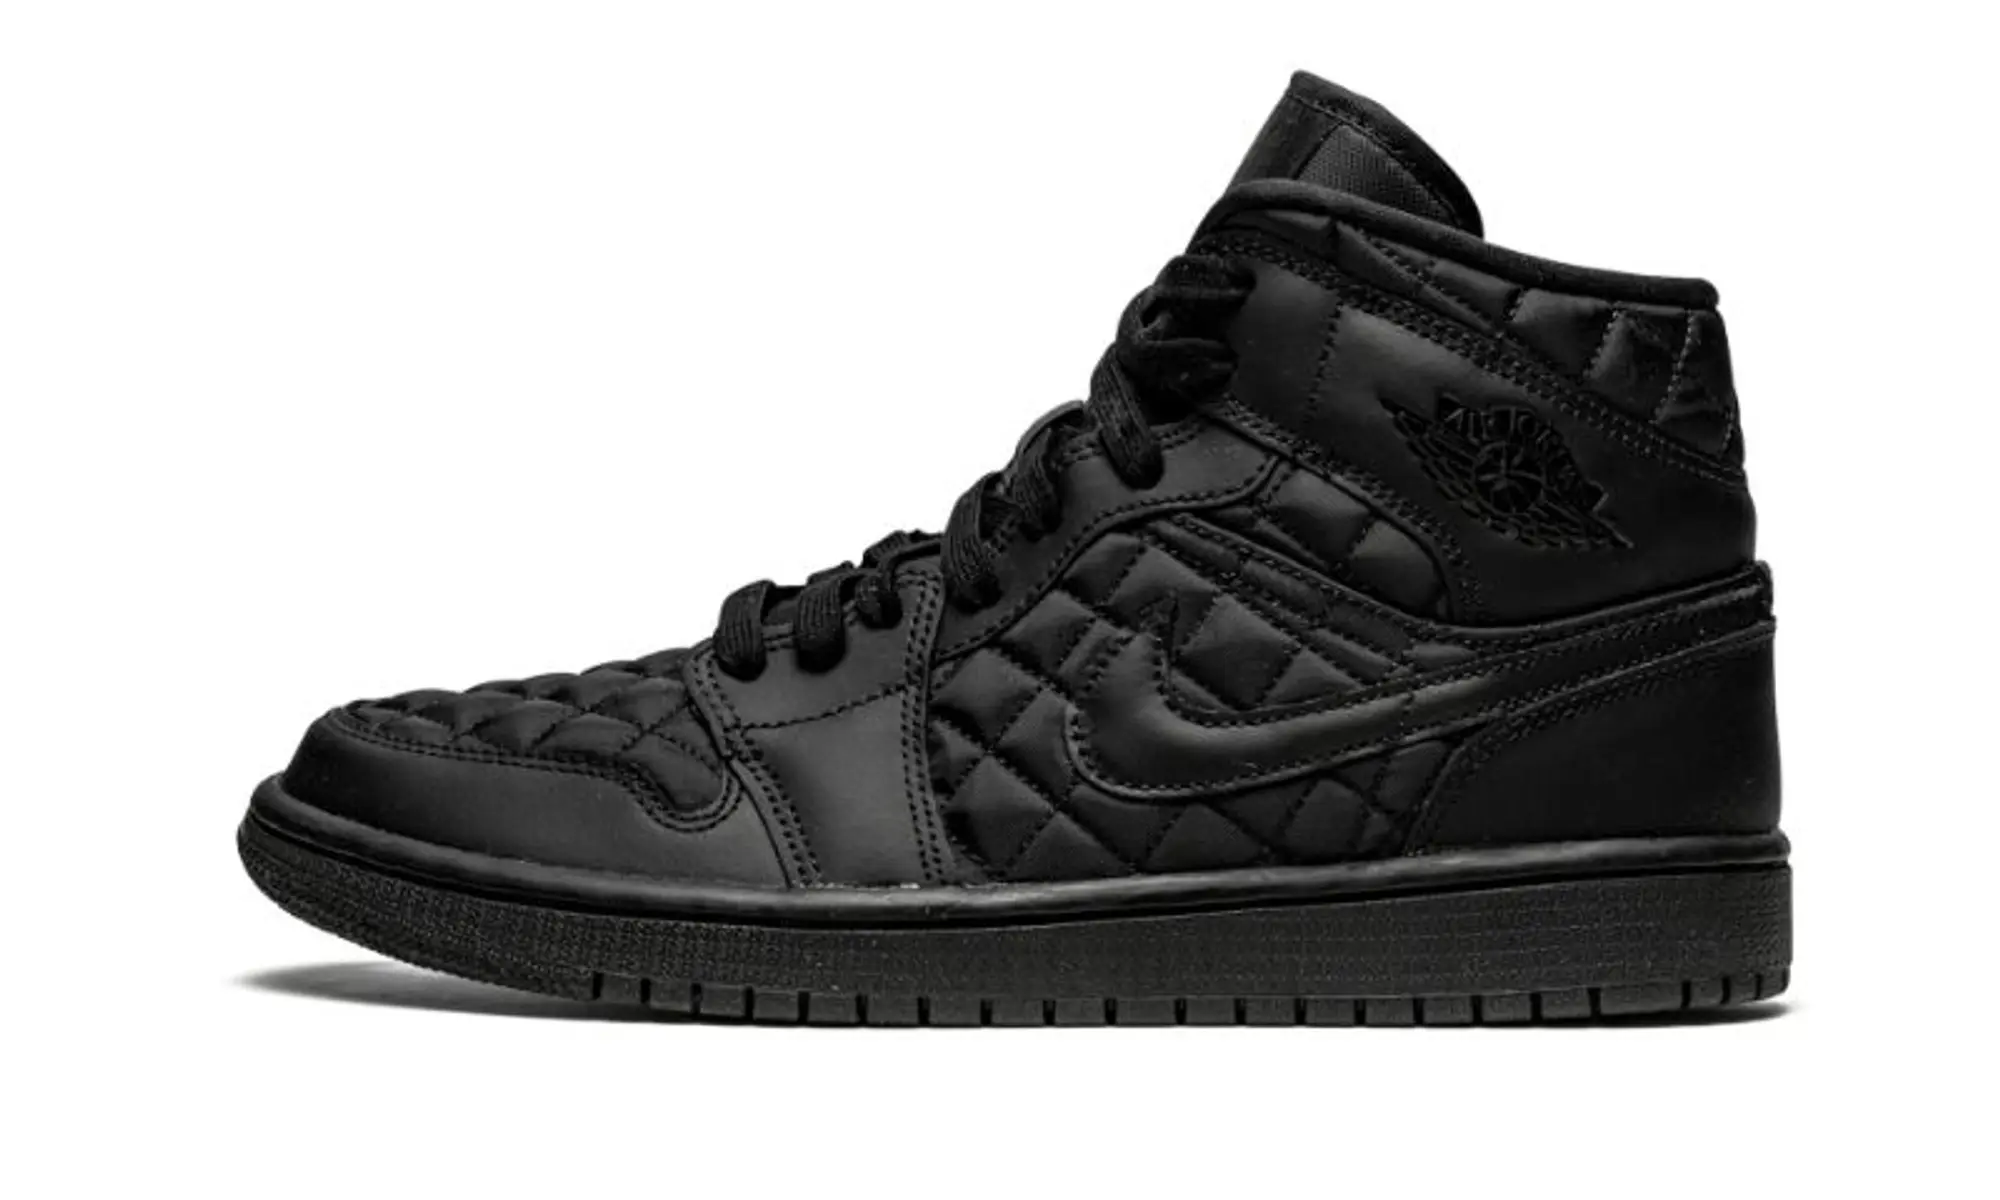 Nike Womens Air Jordan 1 Mid Quilted Black Shoes